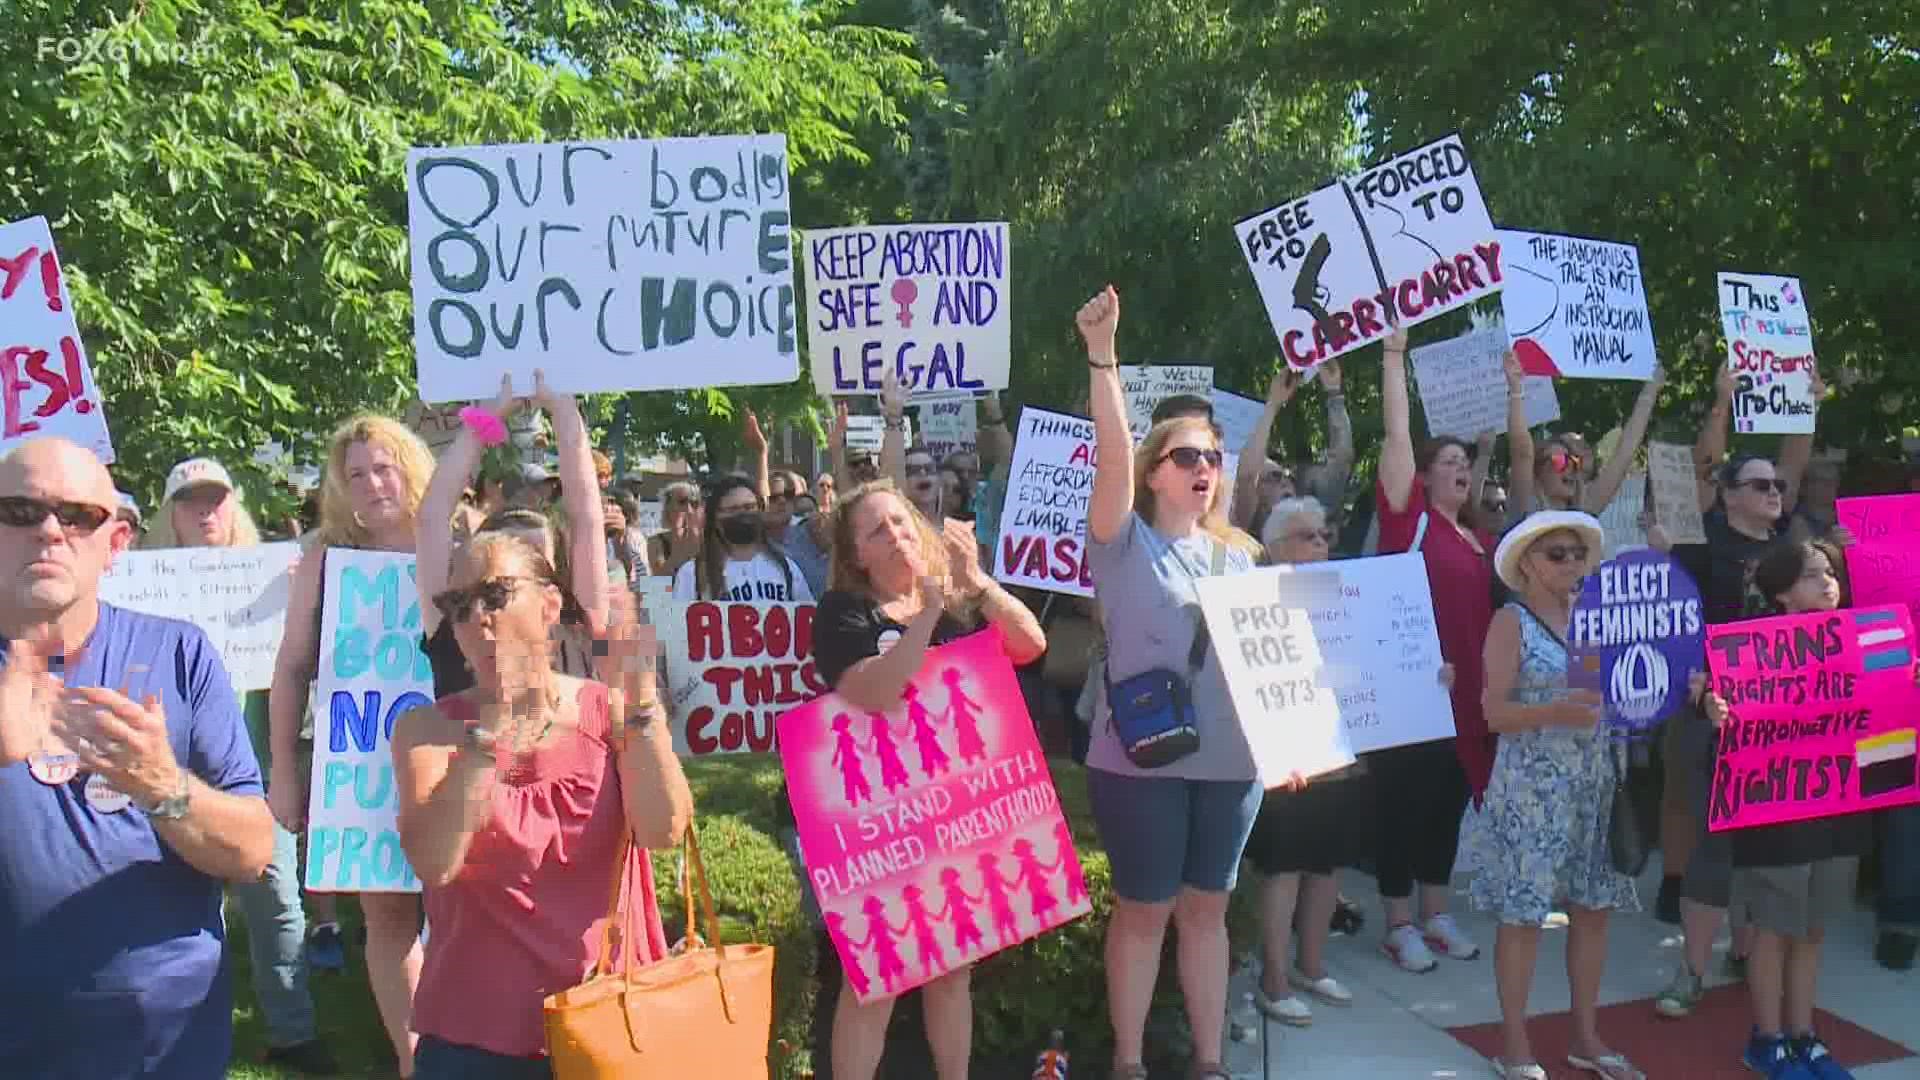 Hundreds gathered at Milford Town Hall Sunday to protest the Supreme Court's decision to overturn Roe v. Wade which protected abortion access nationwide.